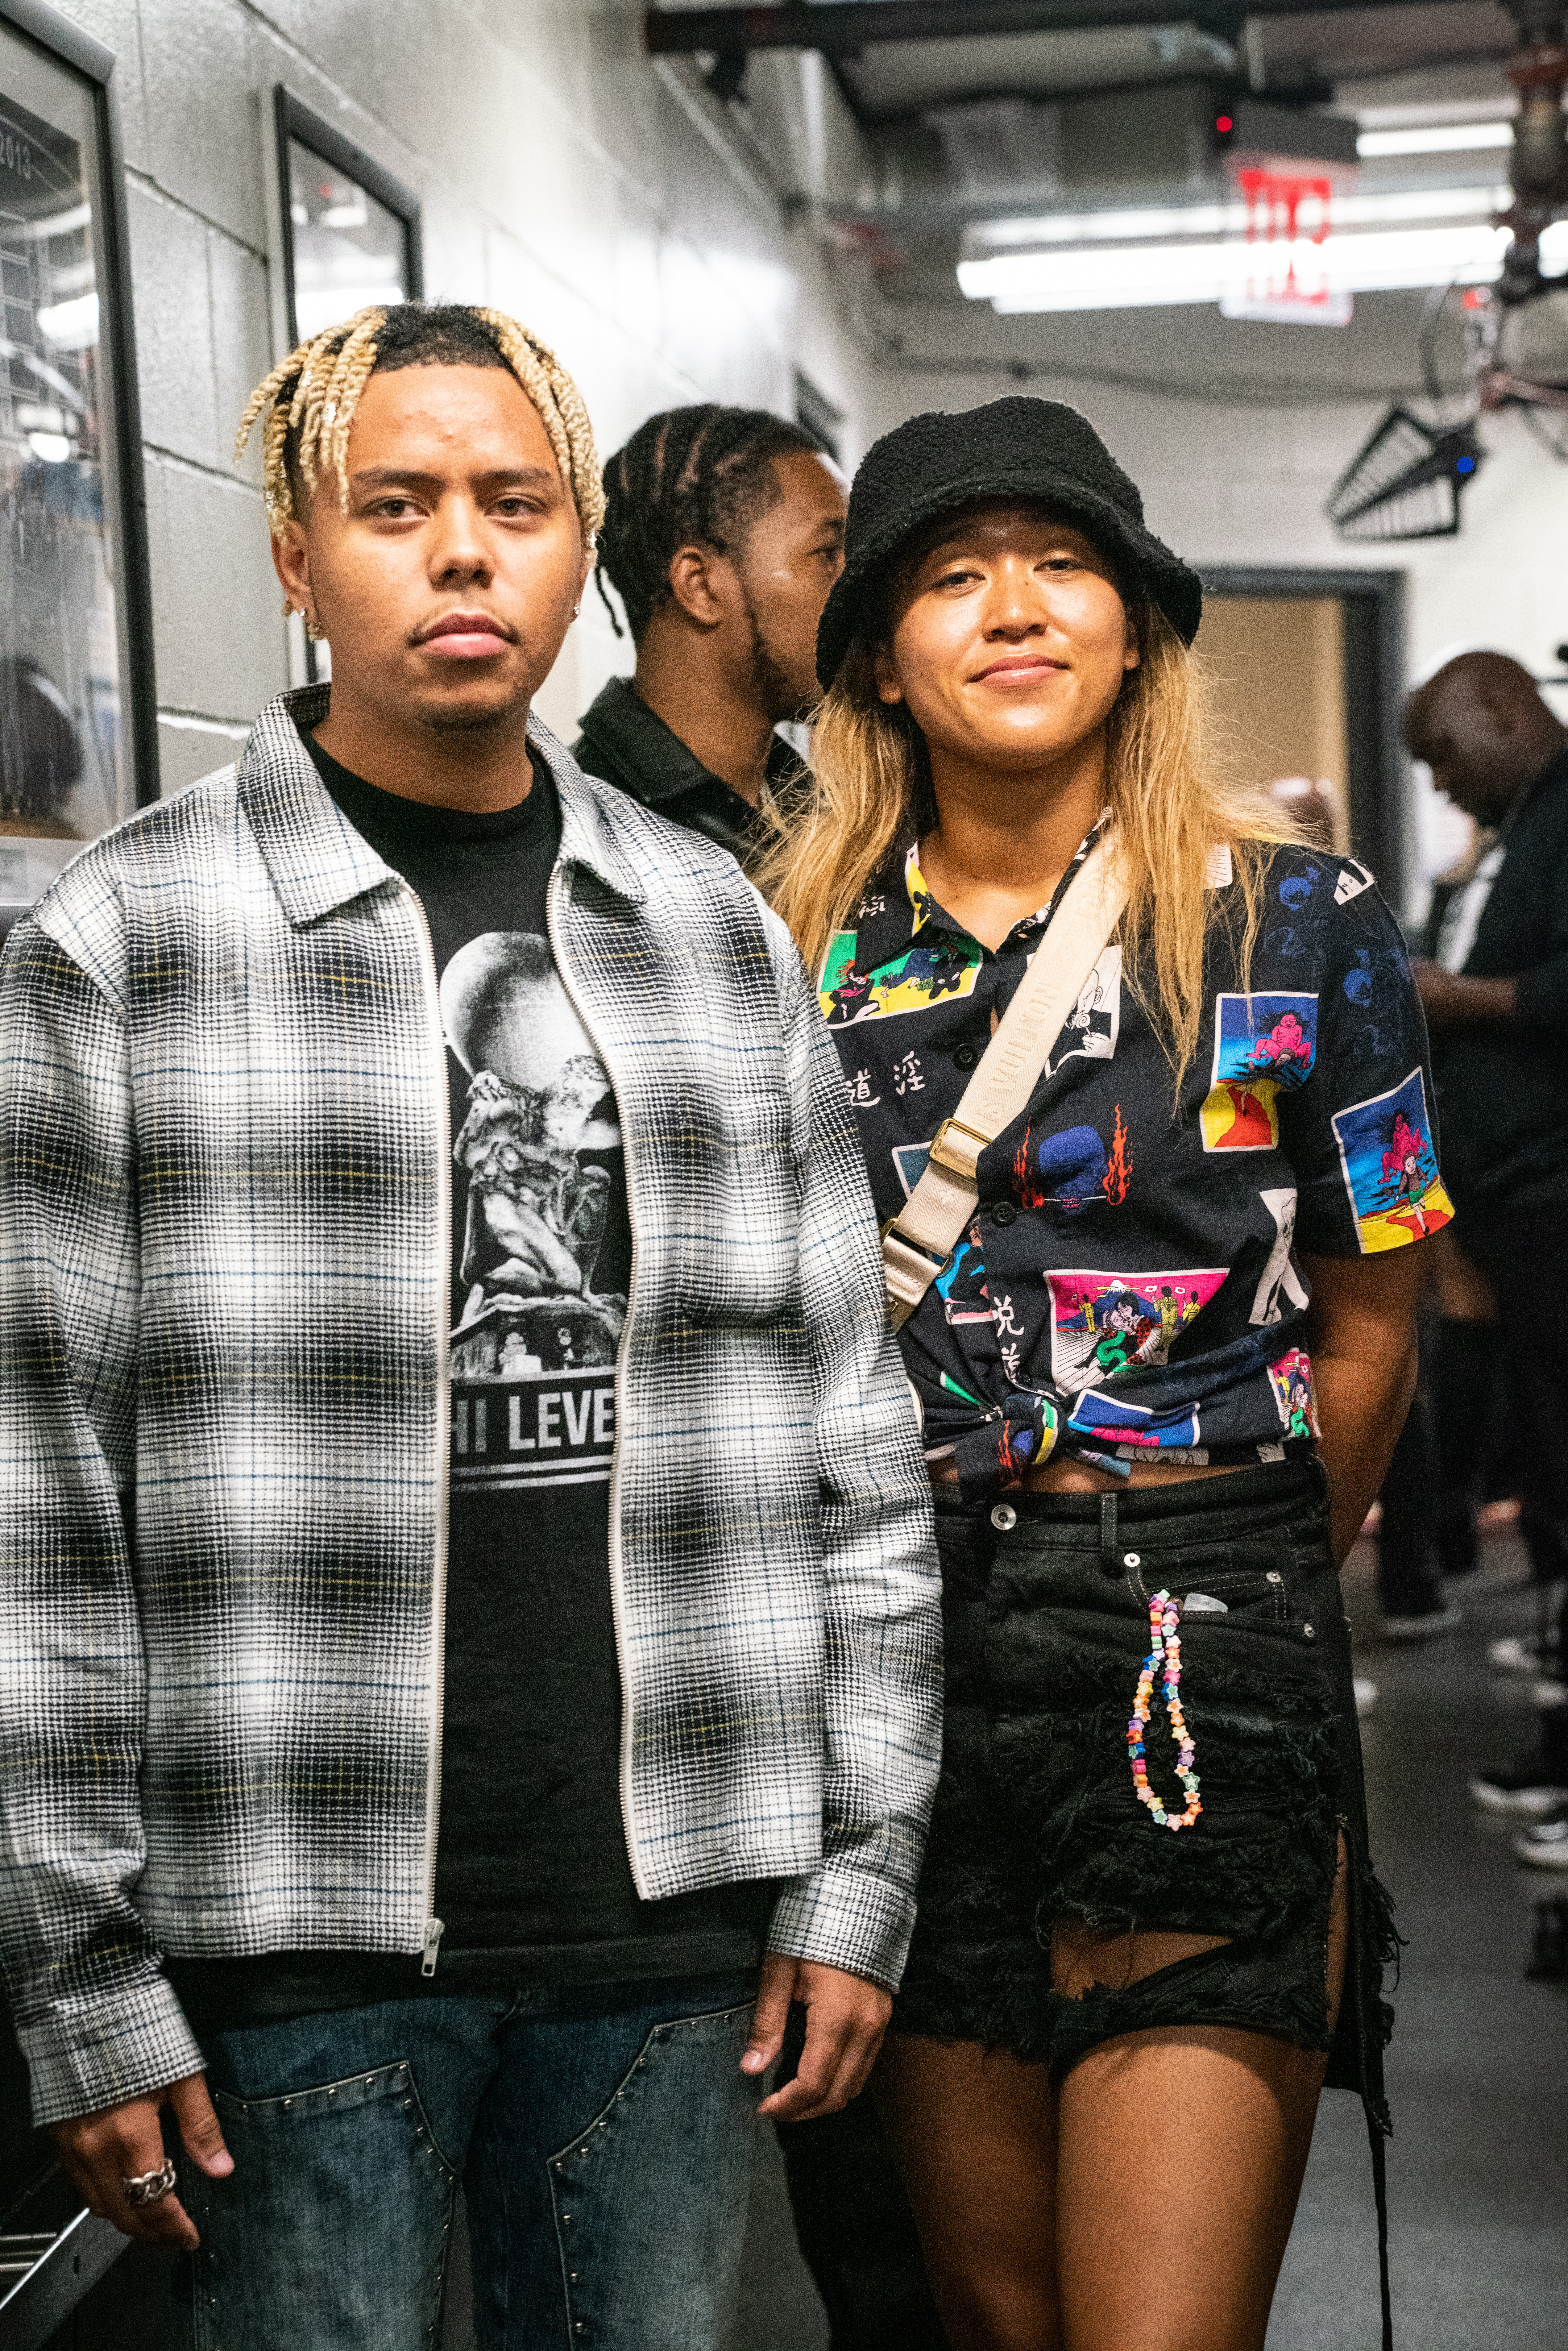 YBN Cordae and Naomi Osaka in New York City on May 28, 2022 | Source: Getty Images